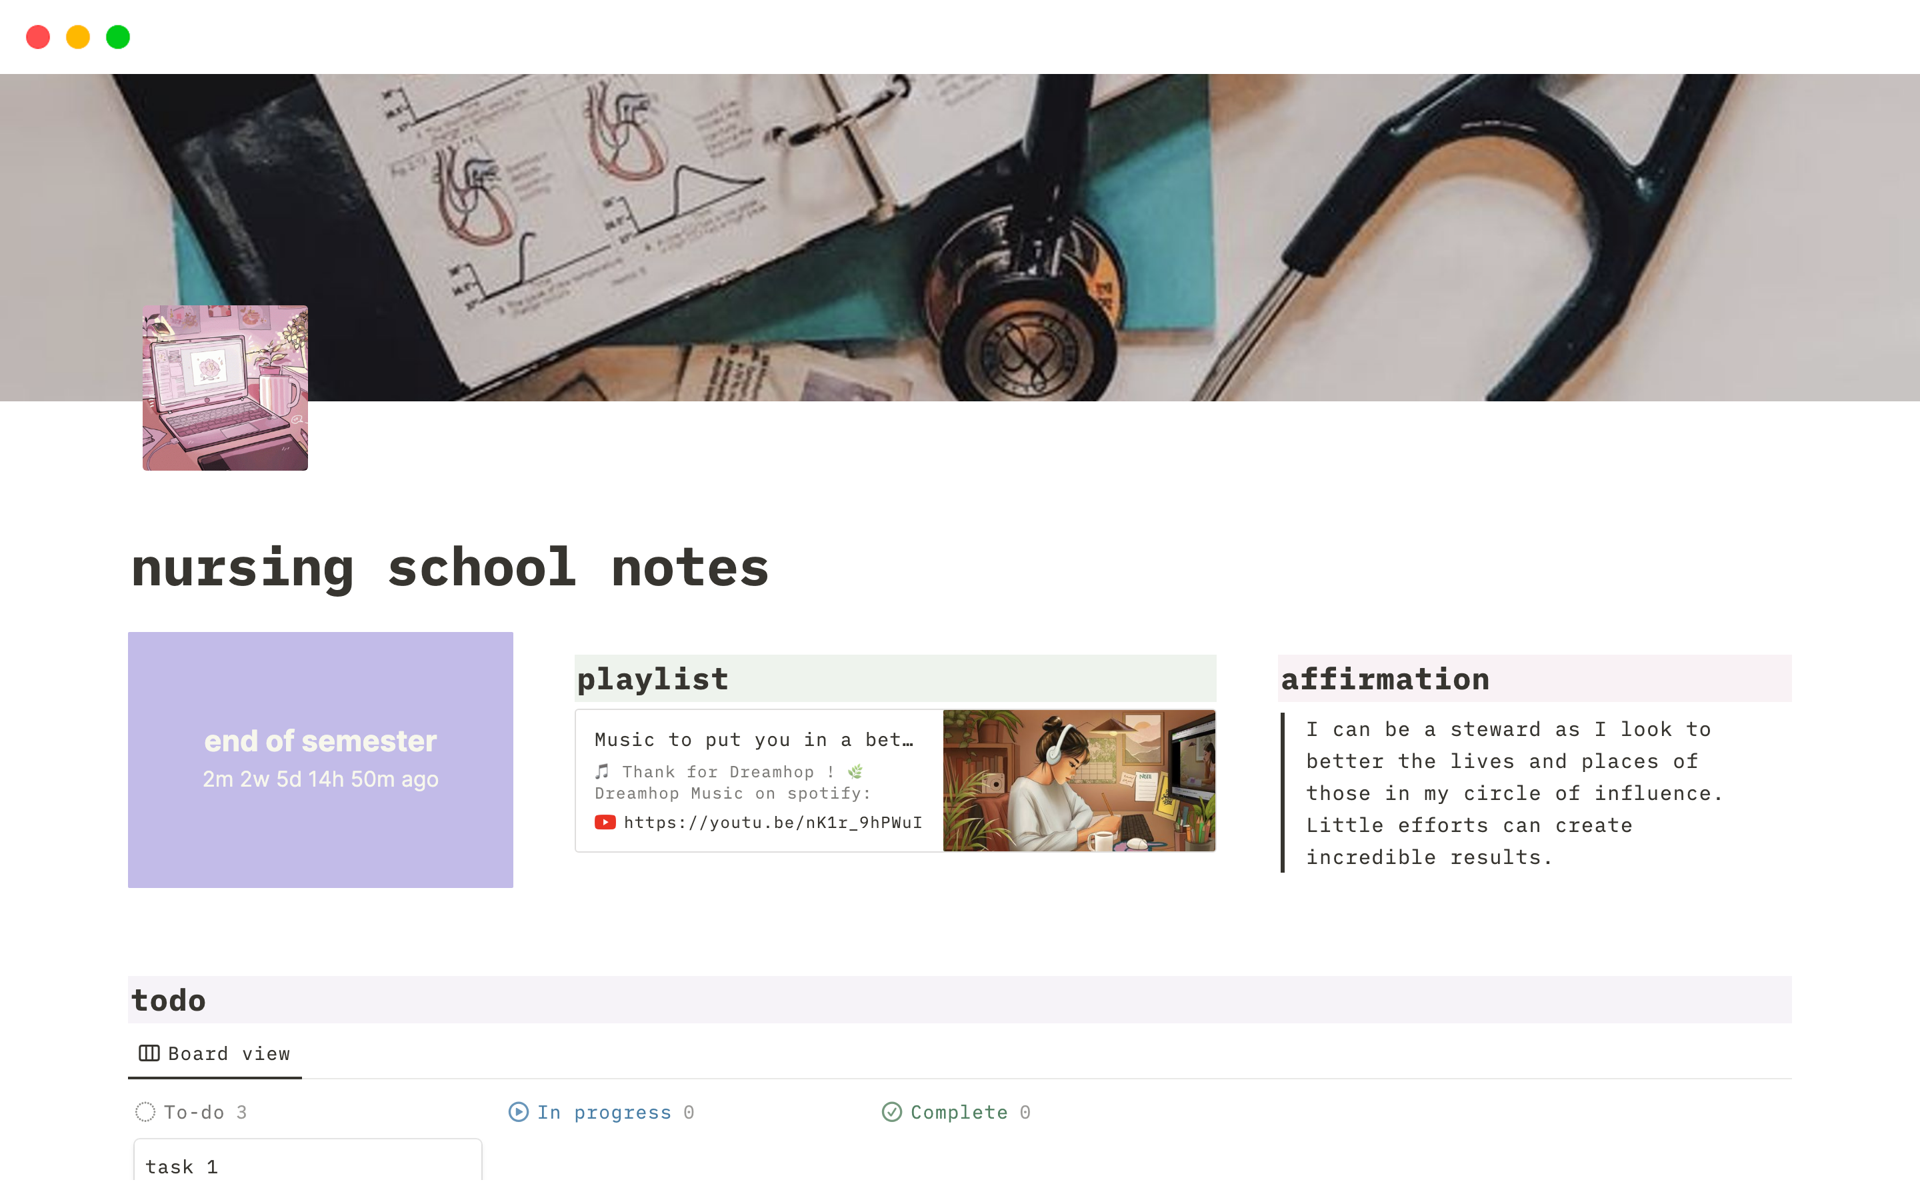 Organize your to-do's for school and your notes so you can find and use them easily.